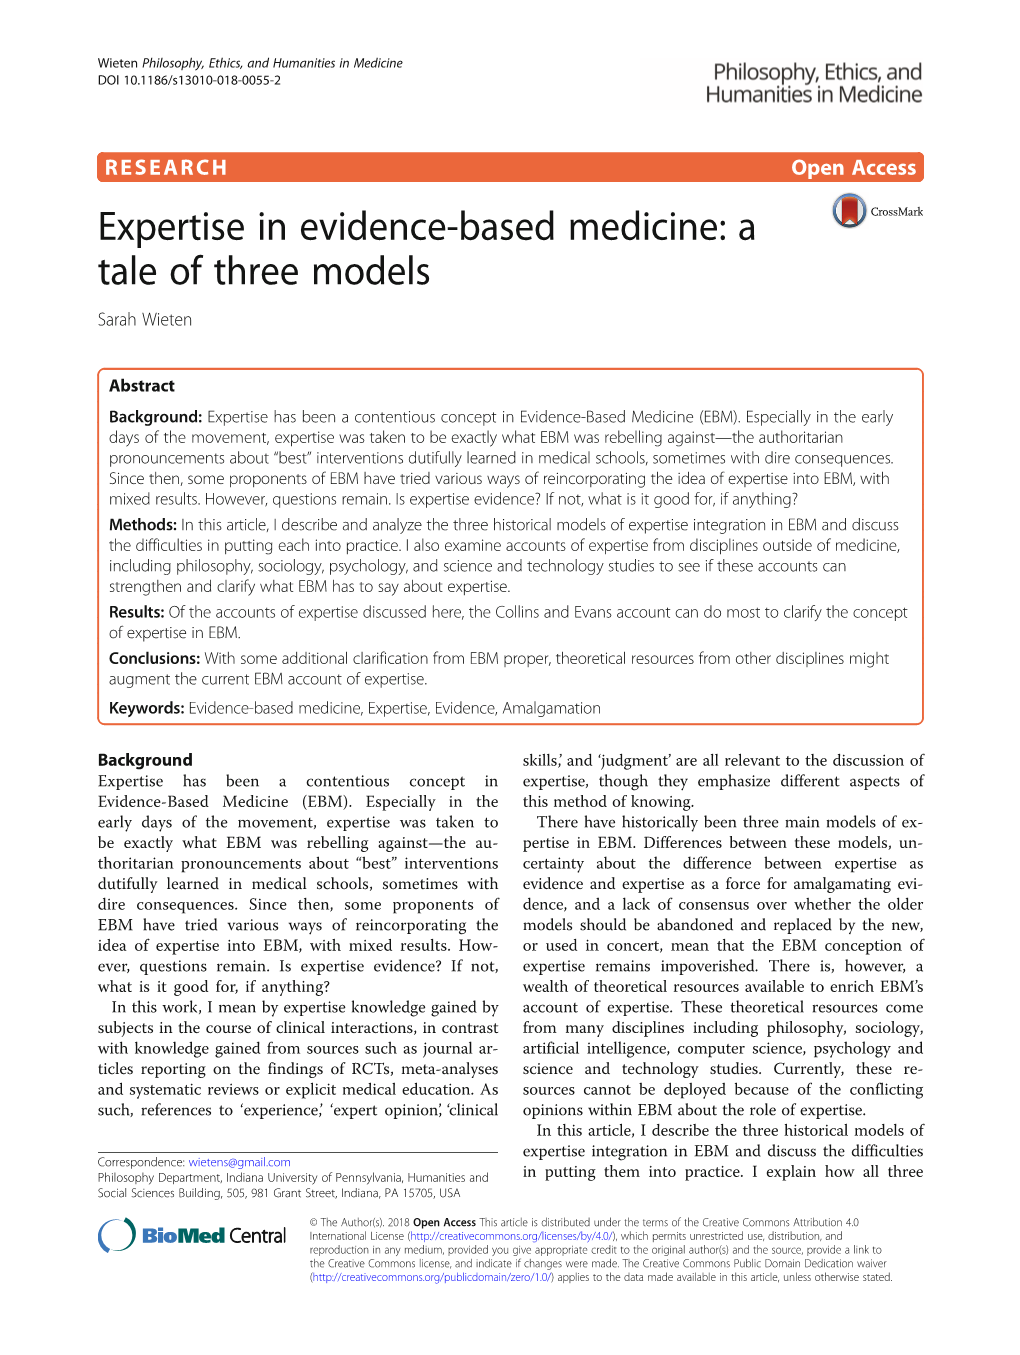 Expertise in Evidence-Based Medicine: a Tale of Three Models Sarah Wieten